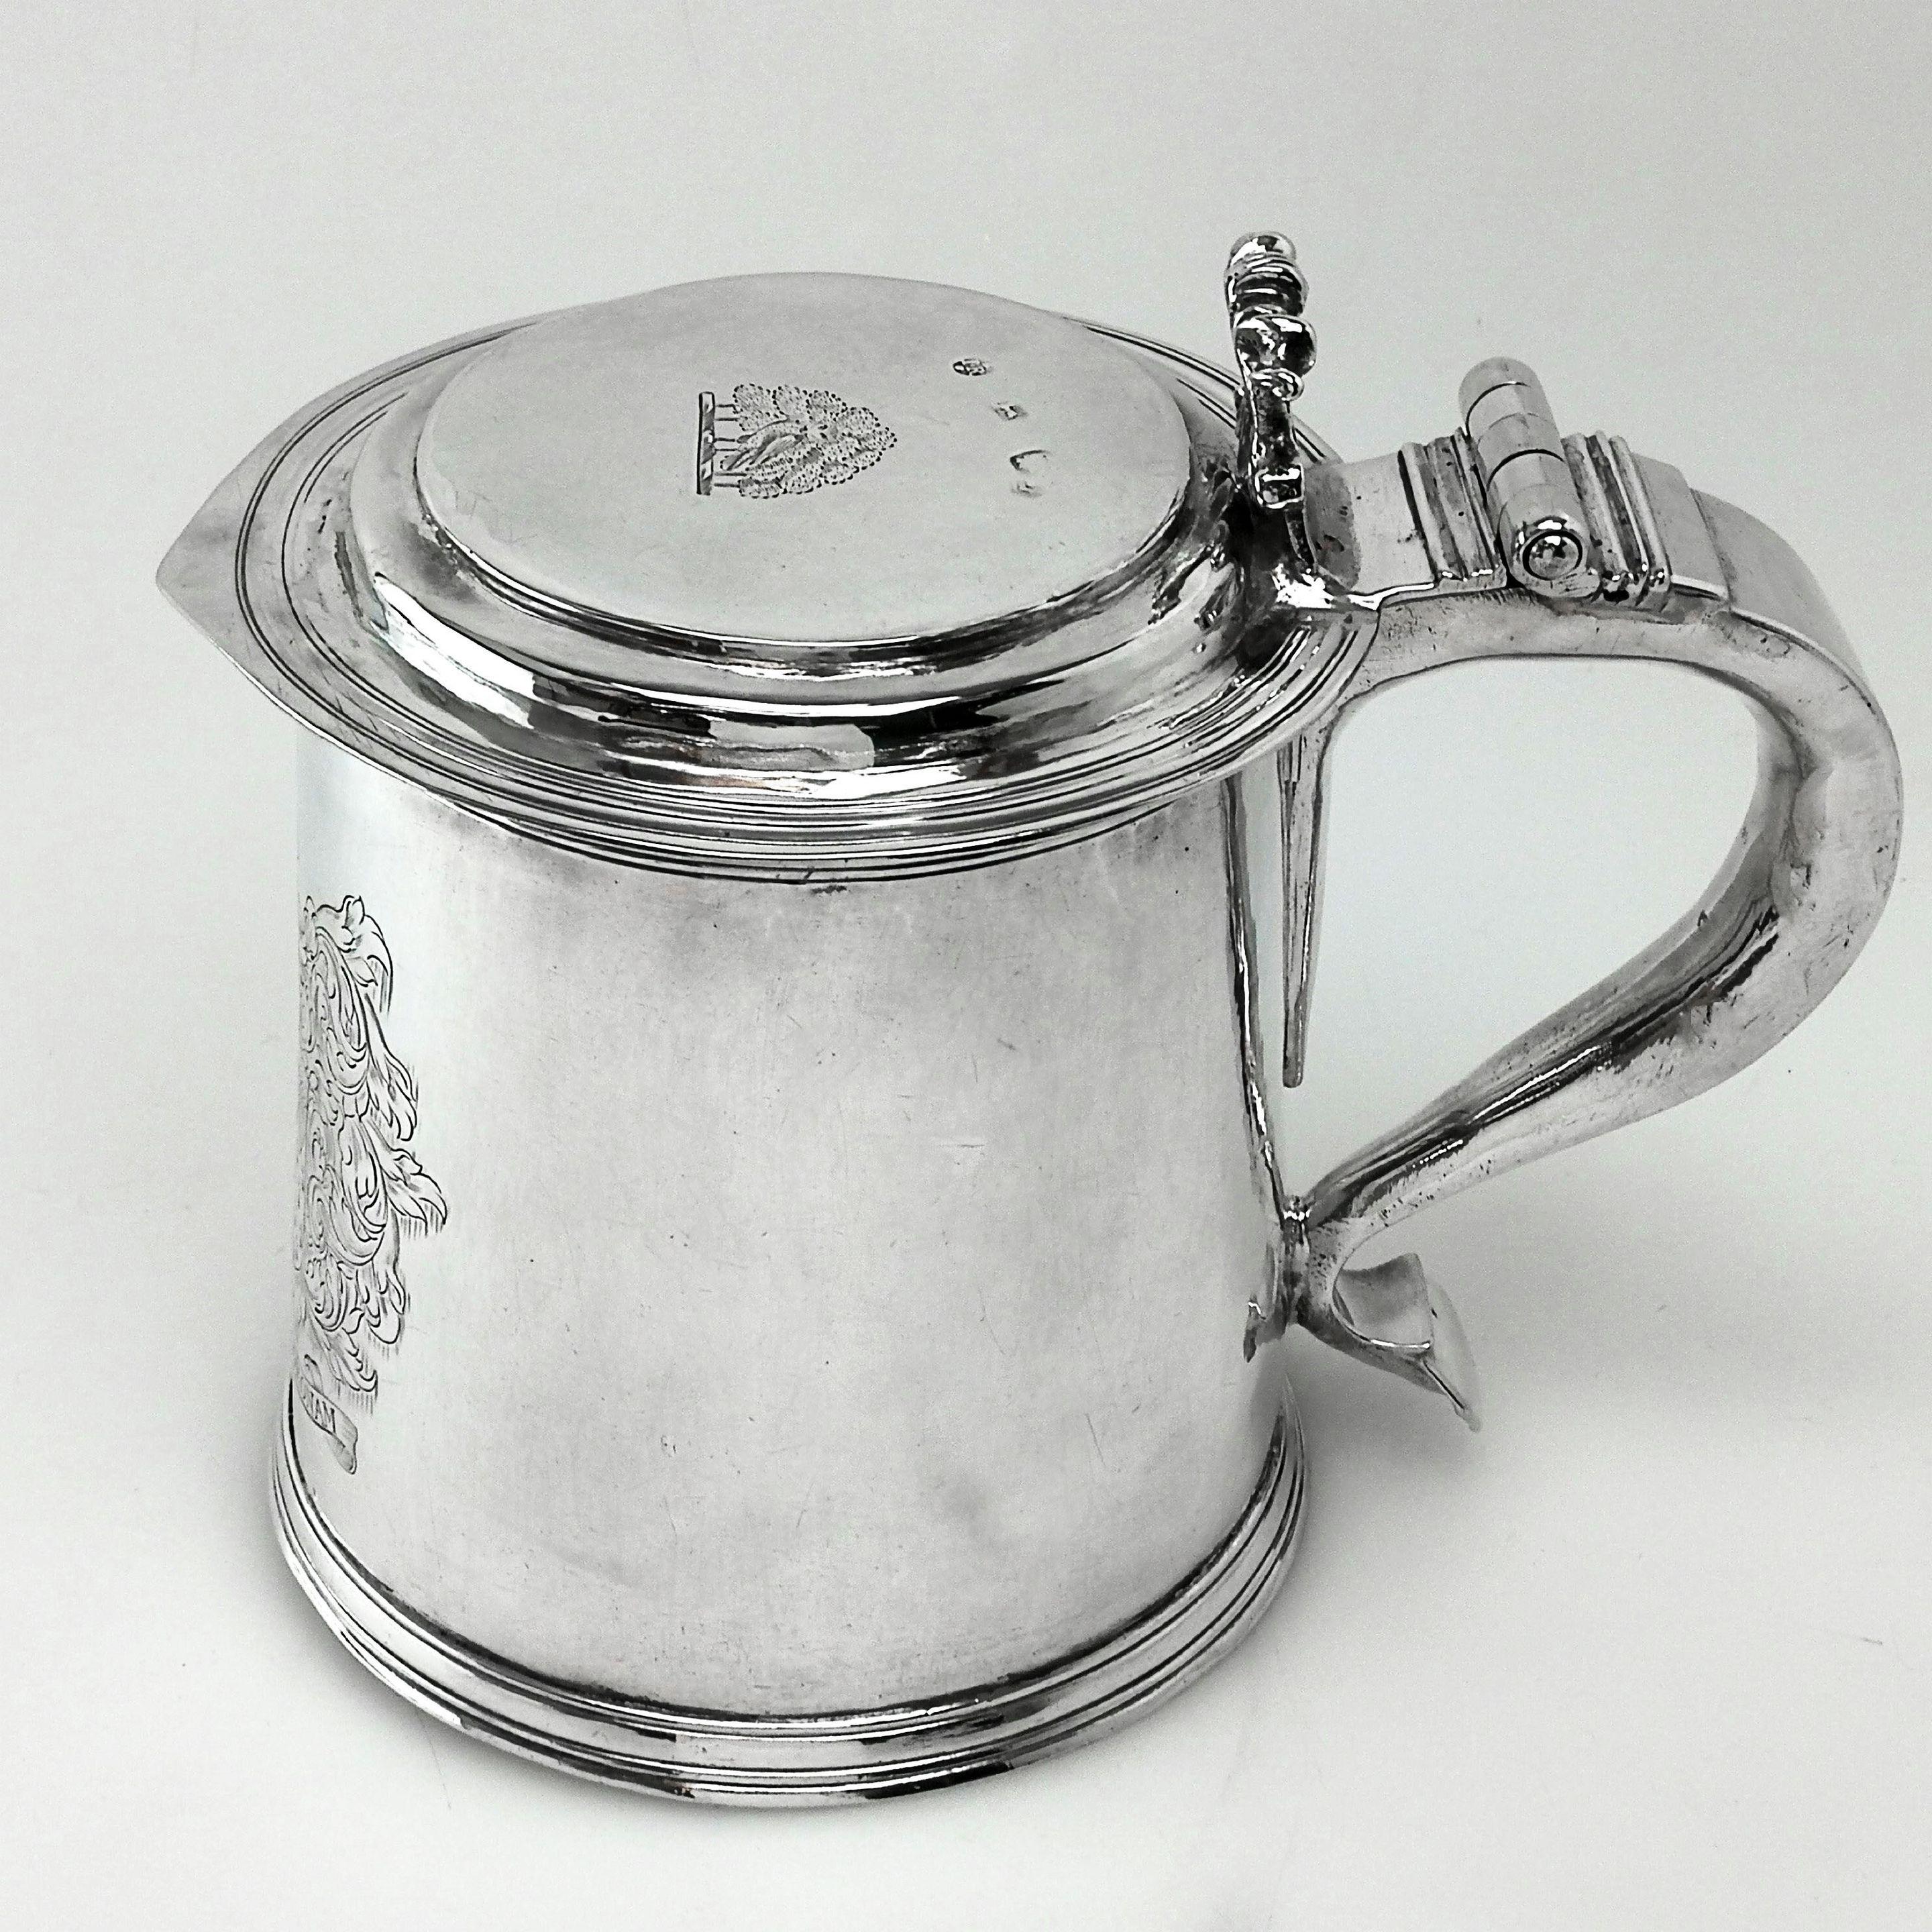 A magnificent Charles II antique solid silver lidded tankard with an elegant tapering straight sided body and featuring and large engraved armorial on the side. The tankard has a hinged lid with a small crest engraved in the centre and a scroll